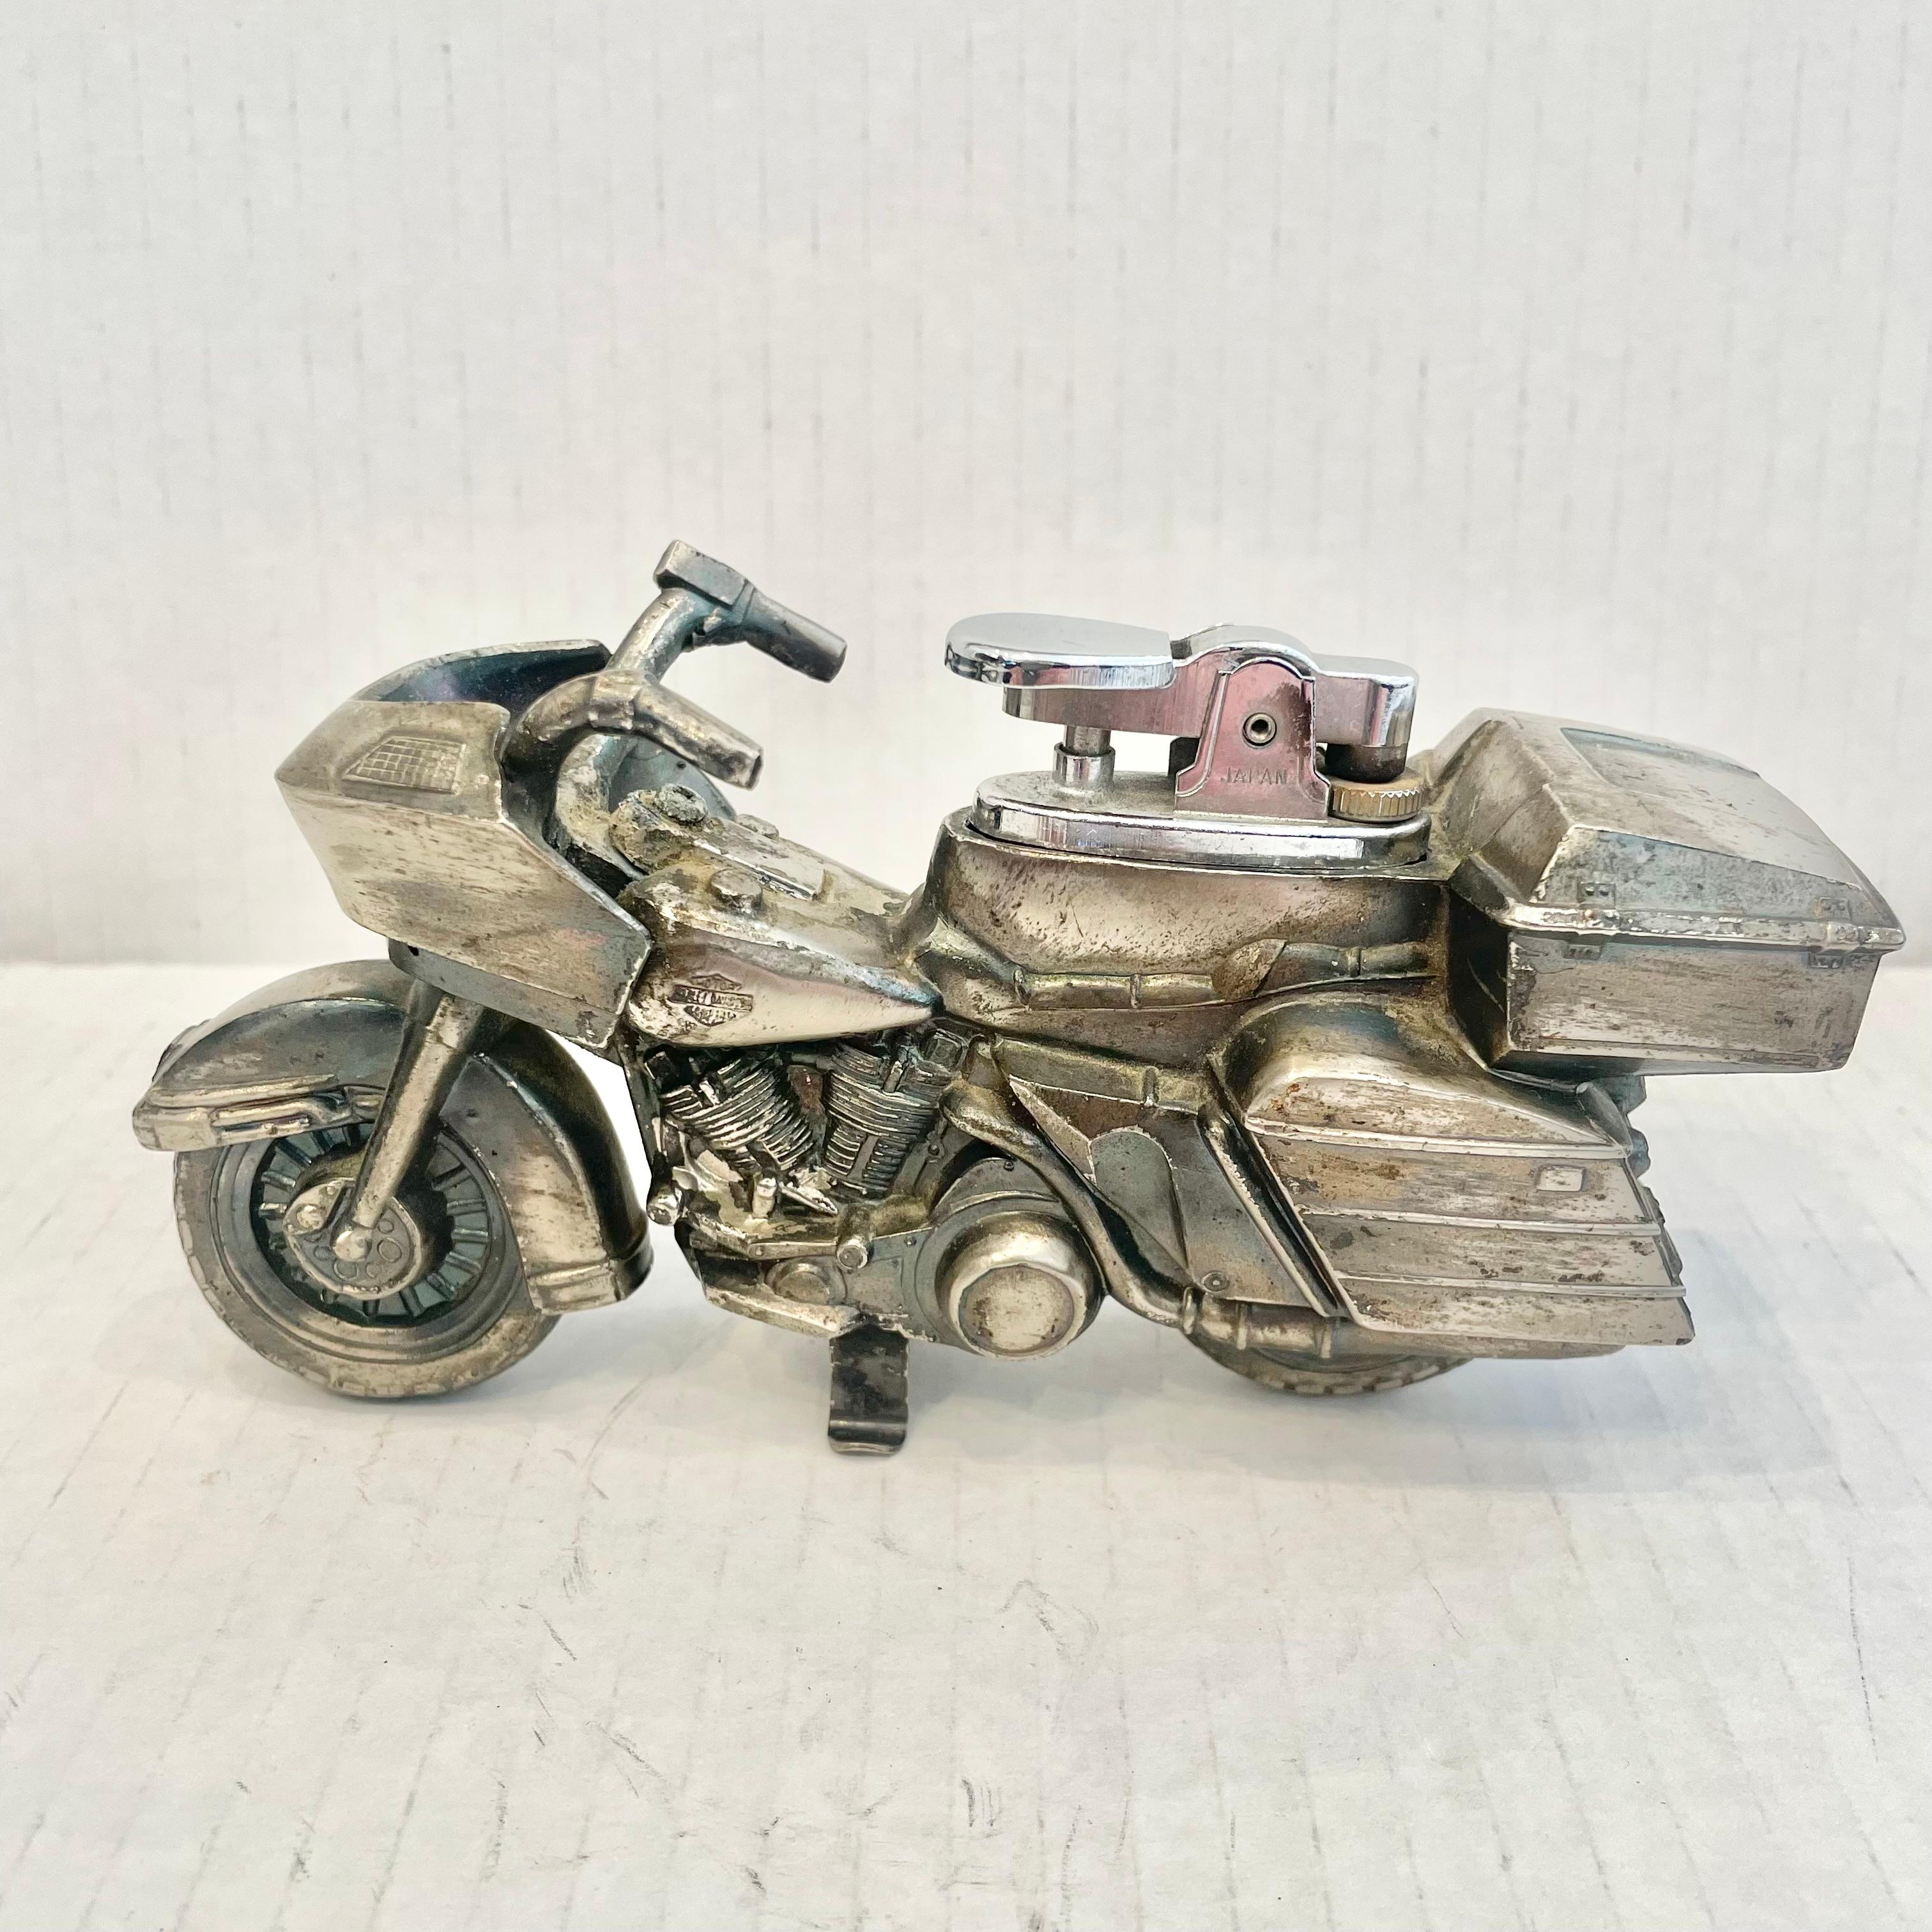 Cool vintage table lighter in the shape of a Harley Davidson Motorcycle. Made completely of metal with a hollow body. Great dark patina on the silver metal with great details. Cool tobacco accessory and conversation piece. Made in Japan in the